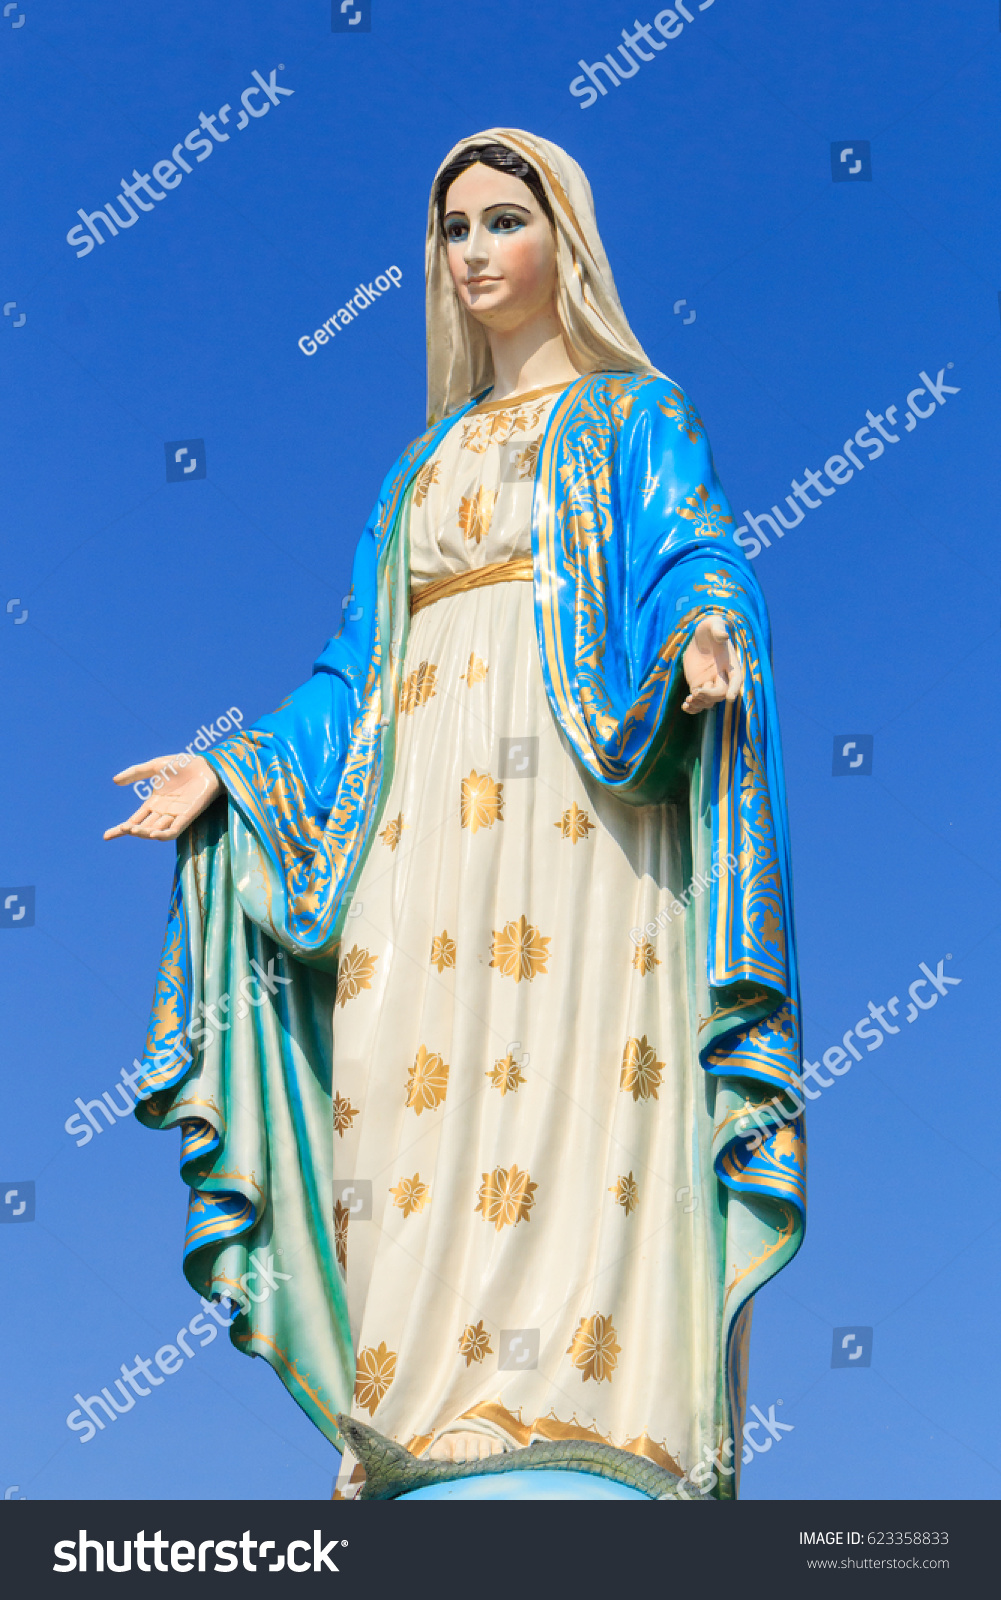 The blessed holy women Lady of Lourdes, grace virgin mother mary roman catholic statue figure. praying Church steadiliy religious pilgrimage mother of Jesus. Marian devotion Our Lady of Miracles. #623358833